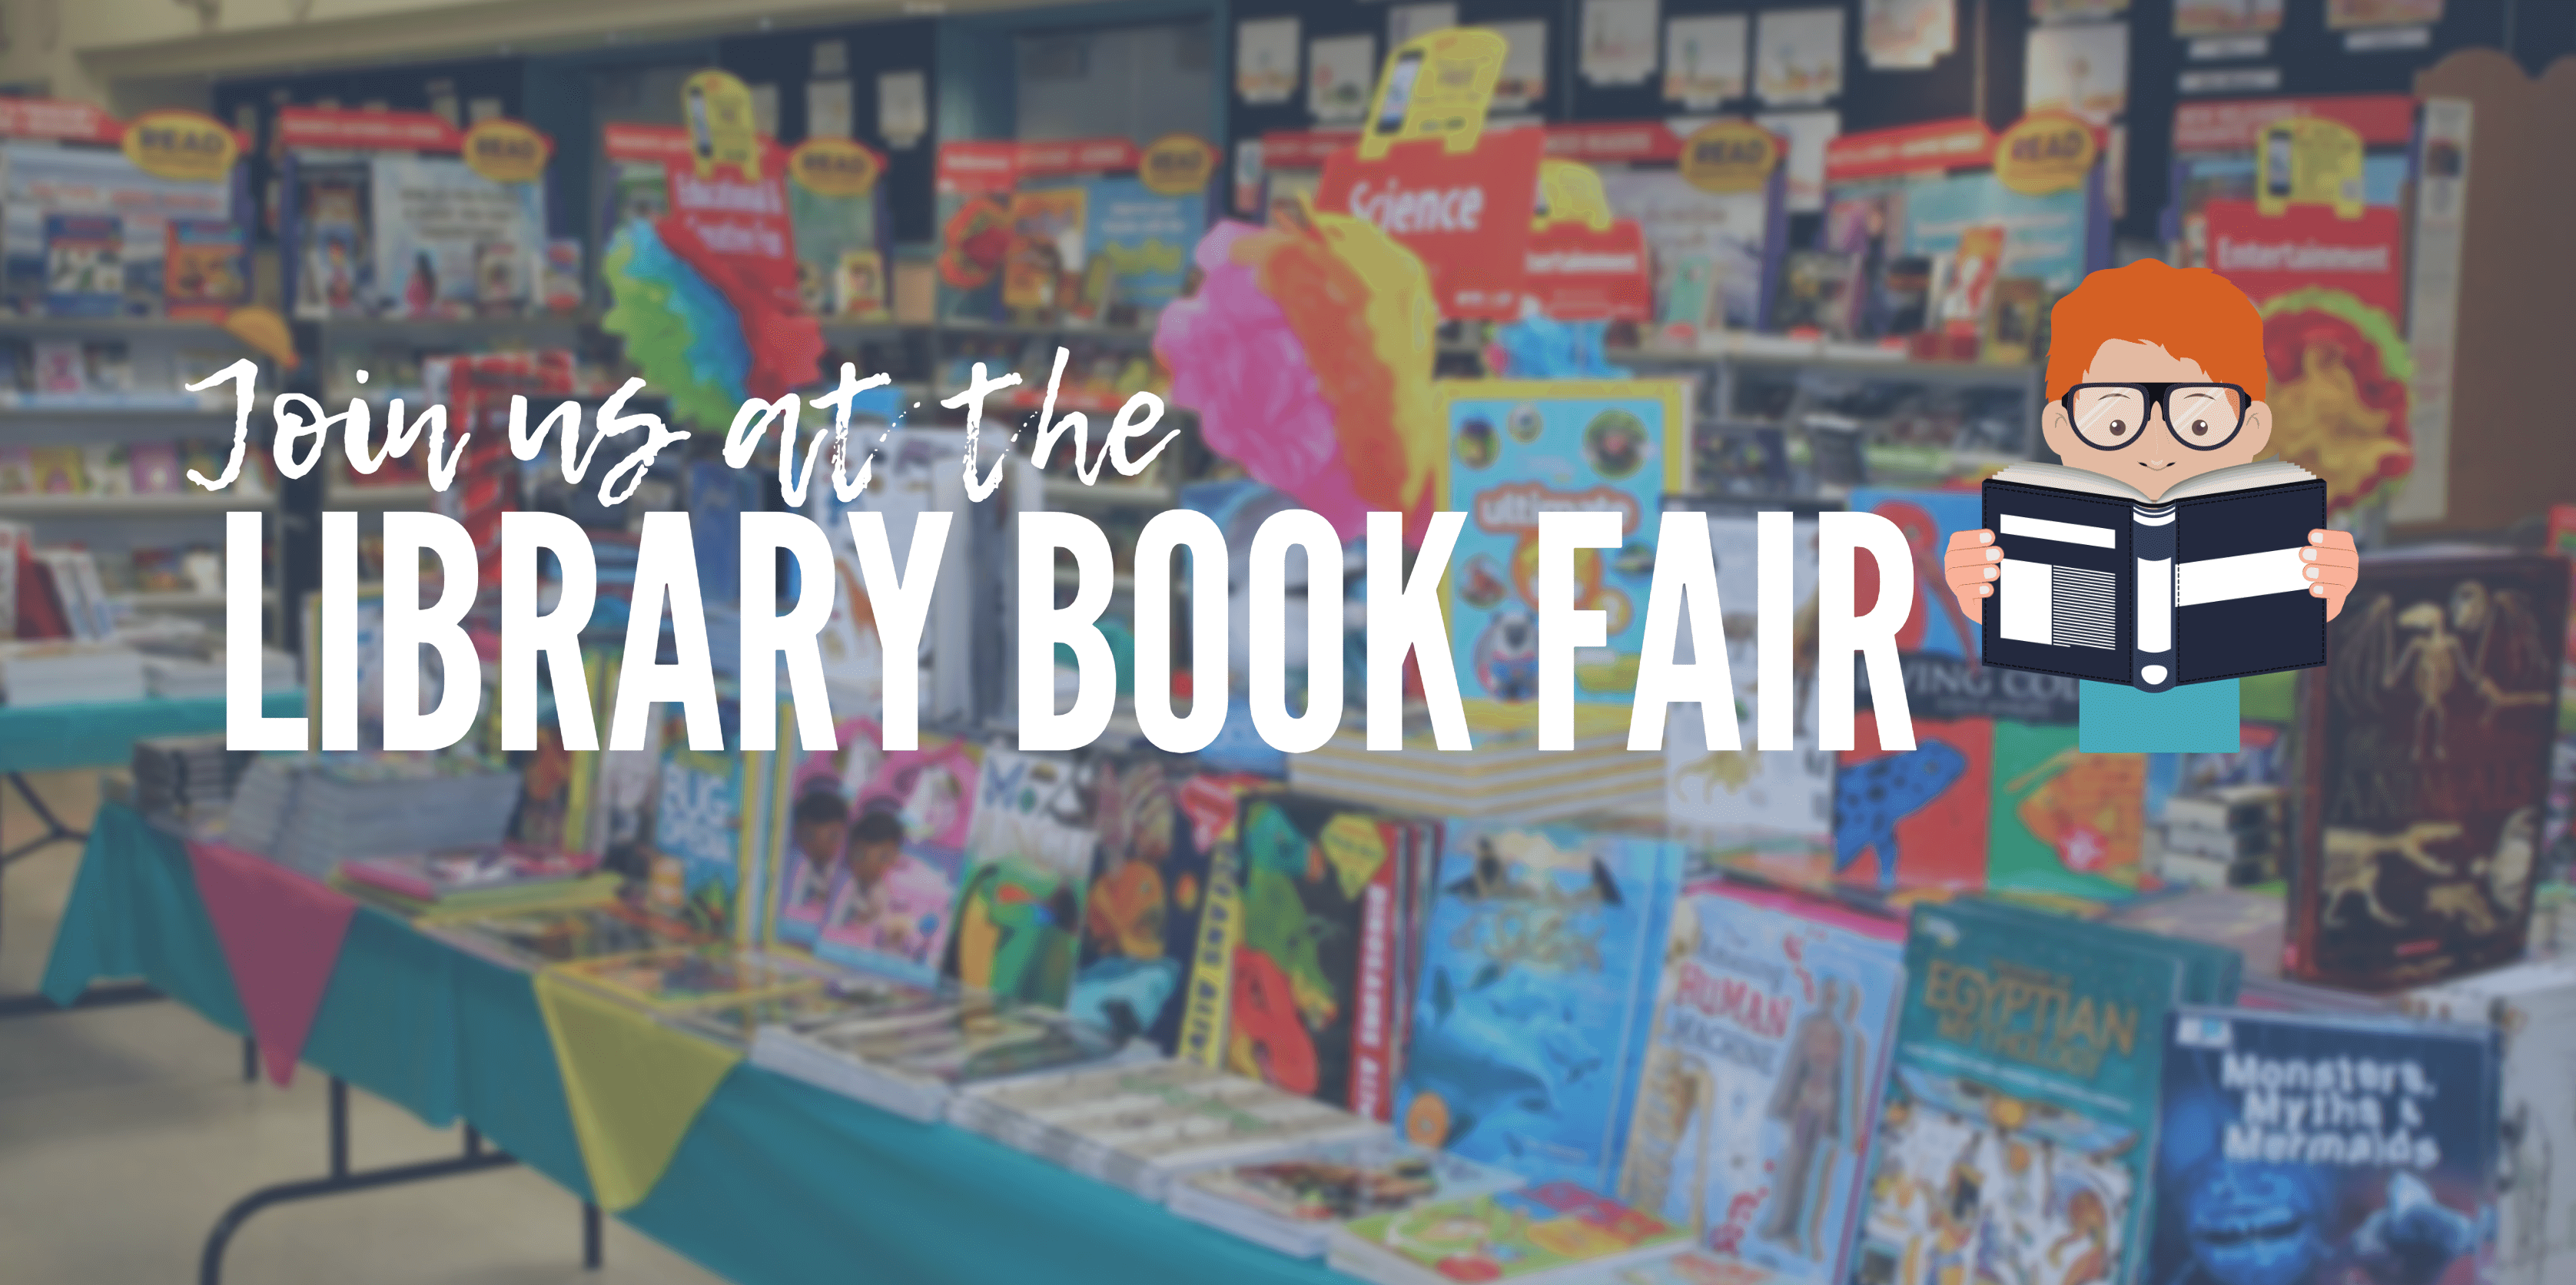 Scholastic Book Fair brings a world of reading to Granby Library